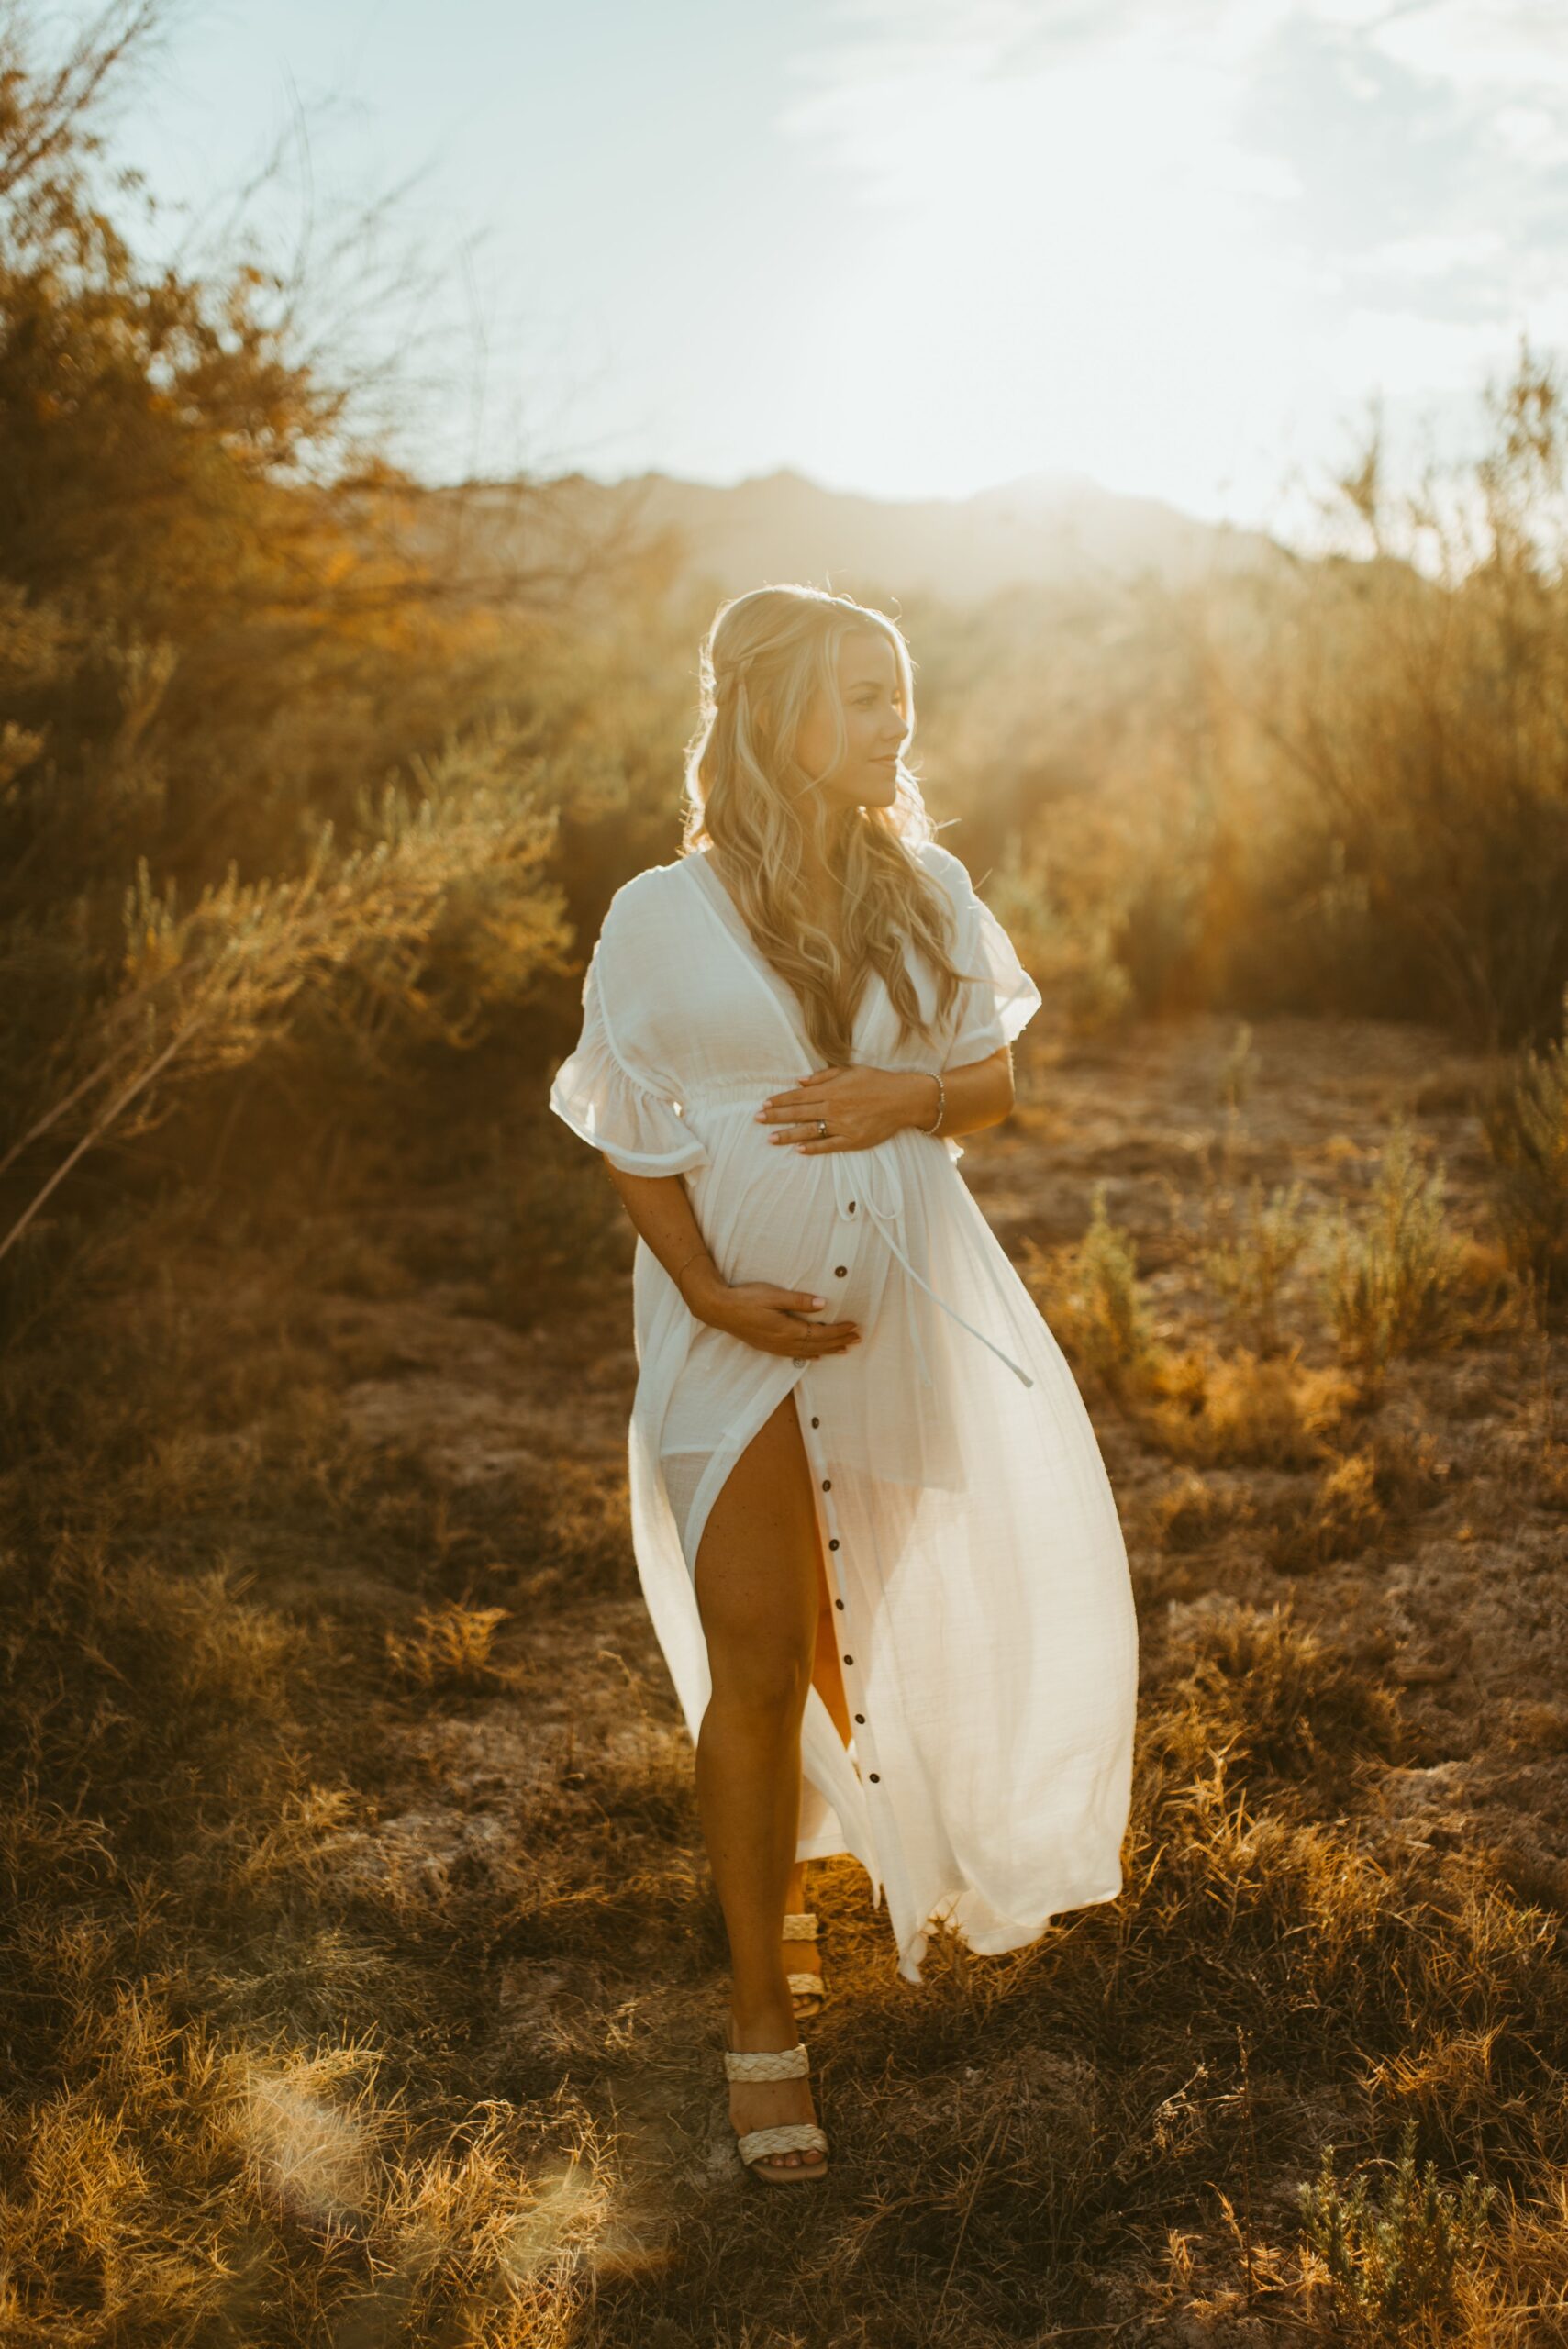 How To Choose White Maternity Dress